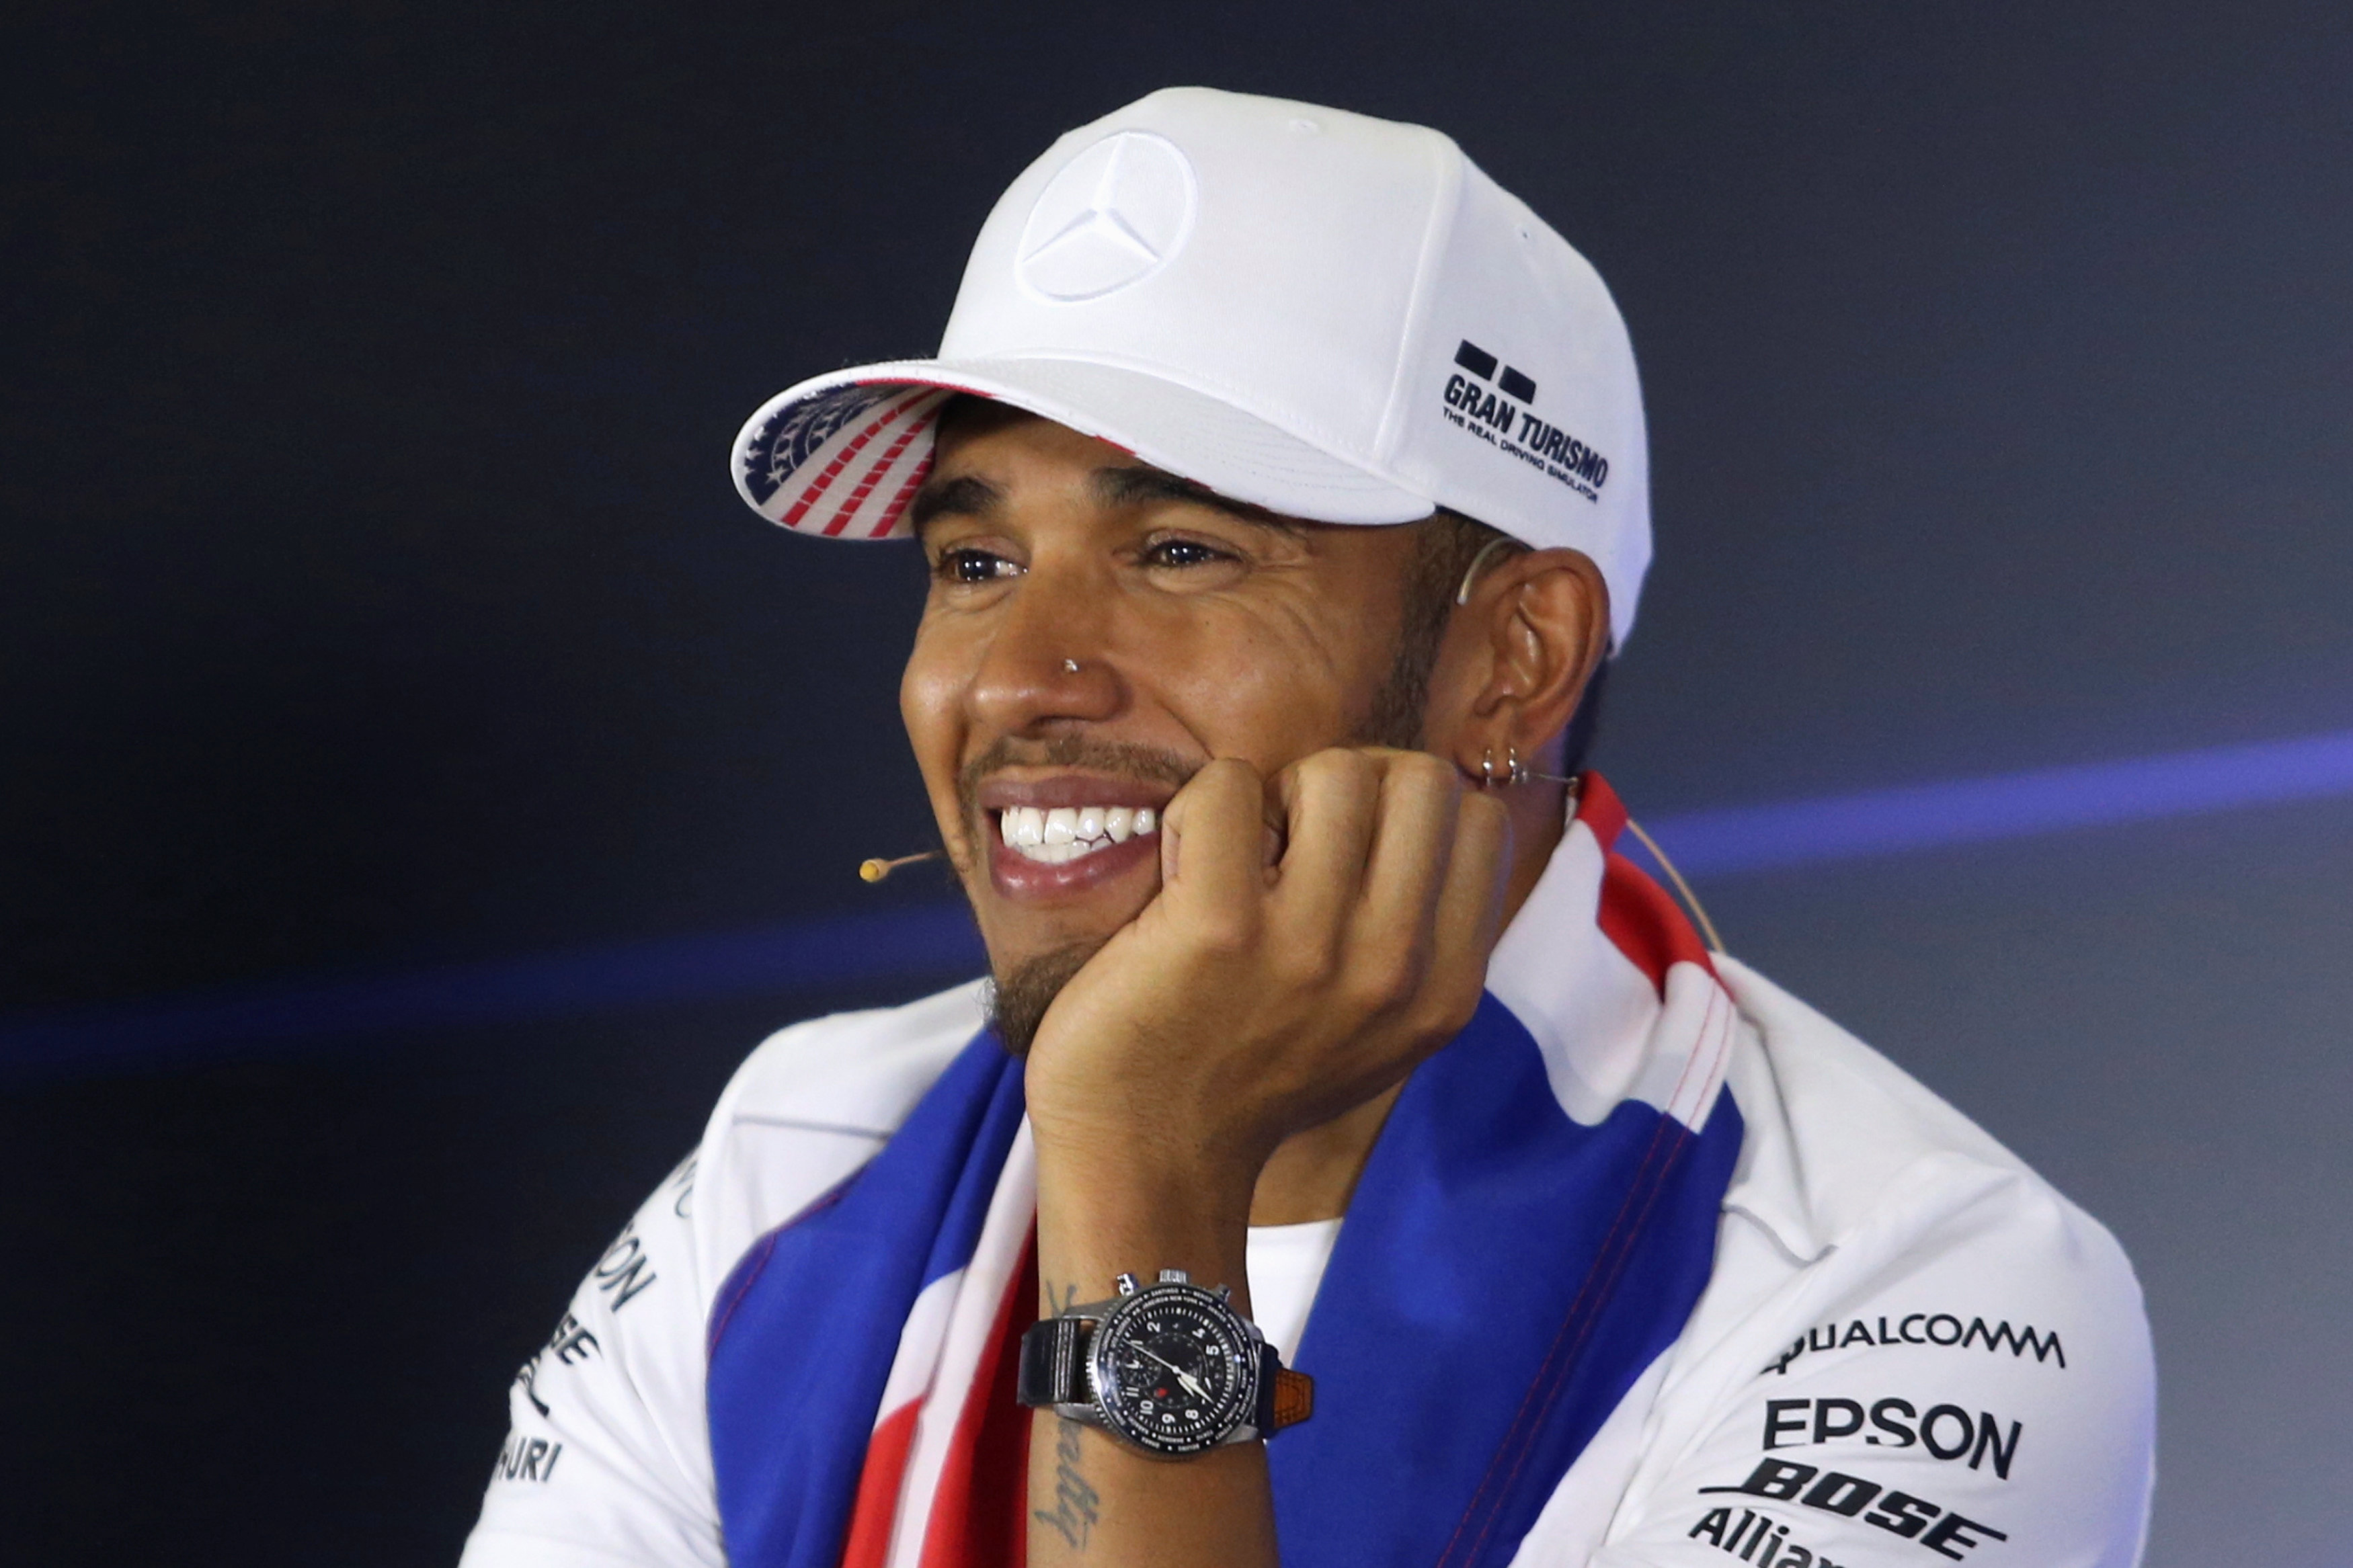 F1: Four titles are great, but Lewis Hamilton wants more